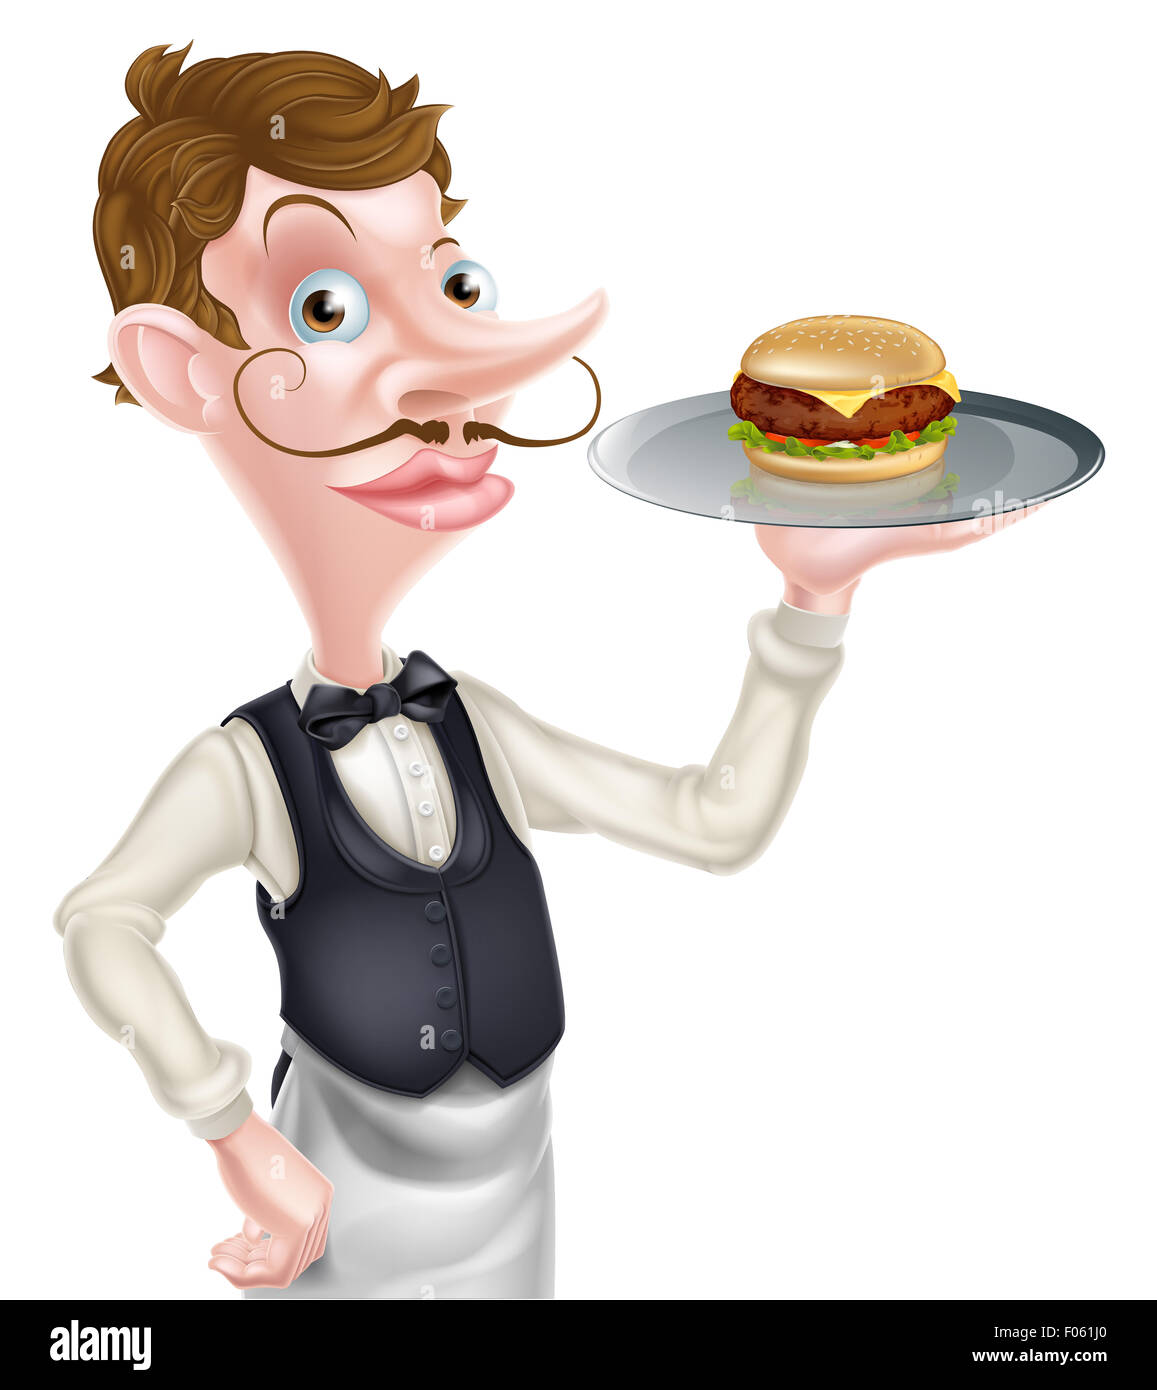 An illustration of a cartoon waiter holding a tray with a burger on it Stock Photo